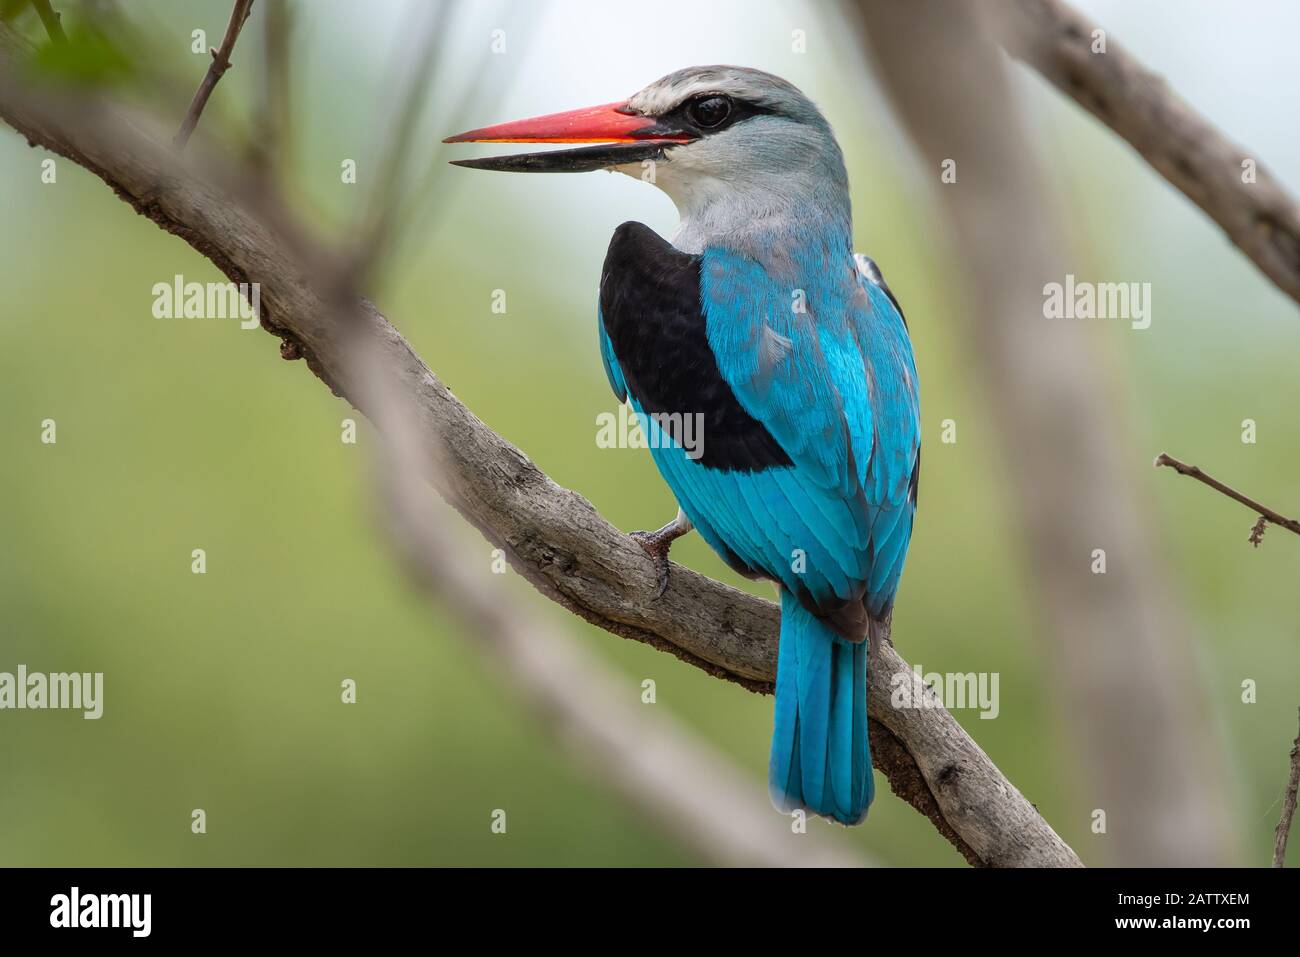 A woodland kingfisher - Halcyon senegalensis - perches on a twig in the Kruger National Park in South Africa Stock Photo